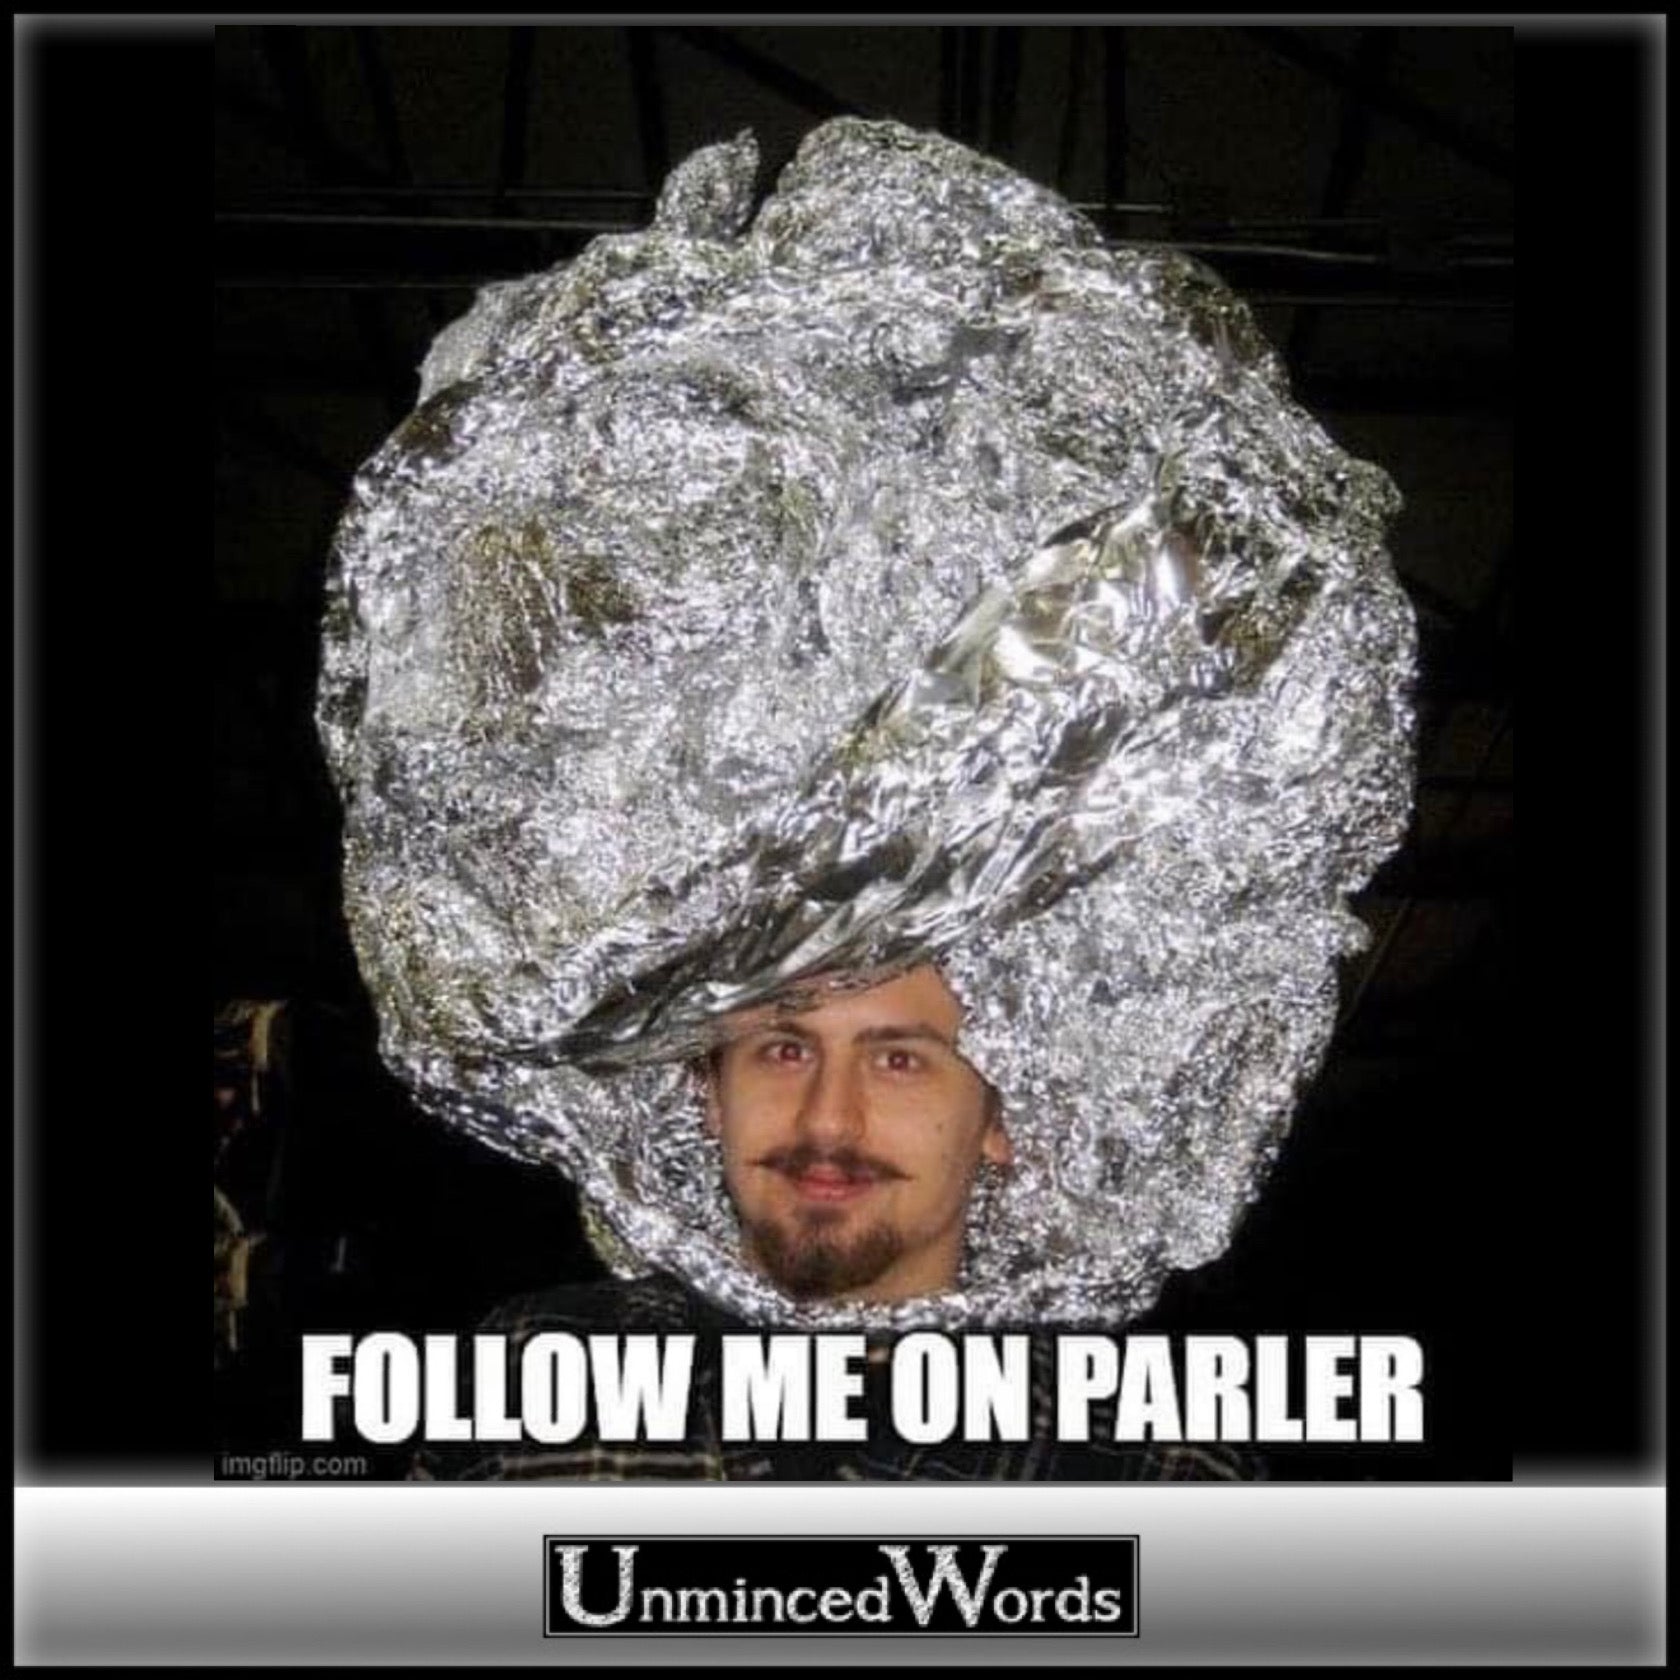 Follow me on Parler meme is all that